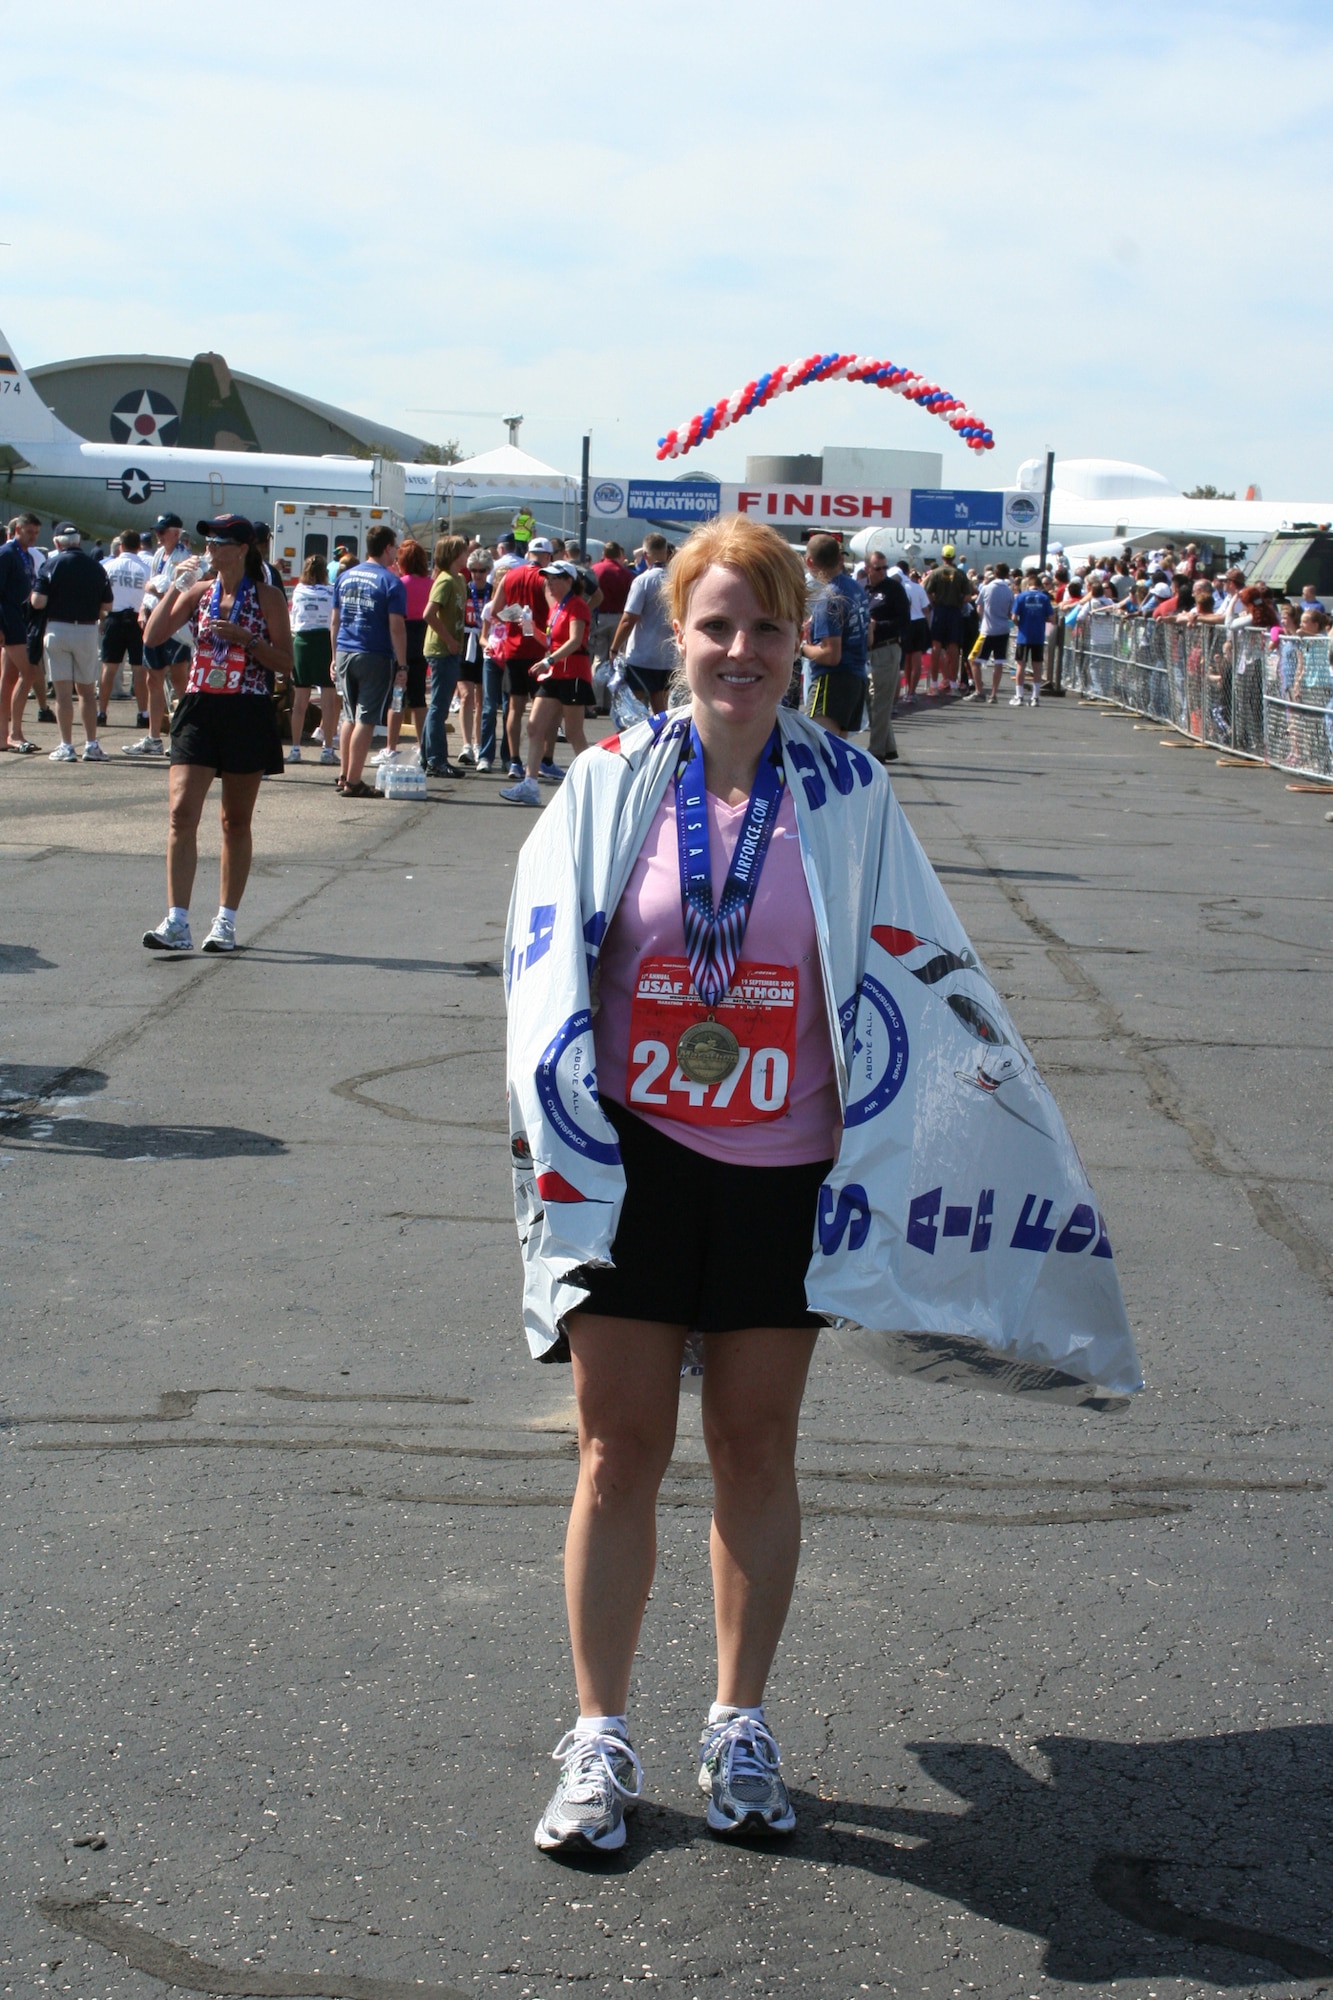 WRIGHT-PATTERSON AIR FORCE BASE, Ohio - Master Sgt. Rebecca Spencer, 445th Logistics Readiness Squadron, recovers shortly after completing the 13th annual United States Air Force Marathon at Wright-Patterson Air Force Base, Ohio, Sept. 19. Sergeant Spencer completed the race with 2,013 other men and women finishing 811th over all with a time of 4 hours, 15 minutes. (U. S. Air Force photo/Capt. Rodney McNany)